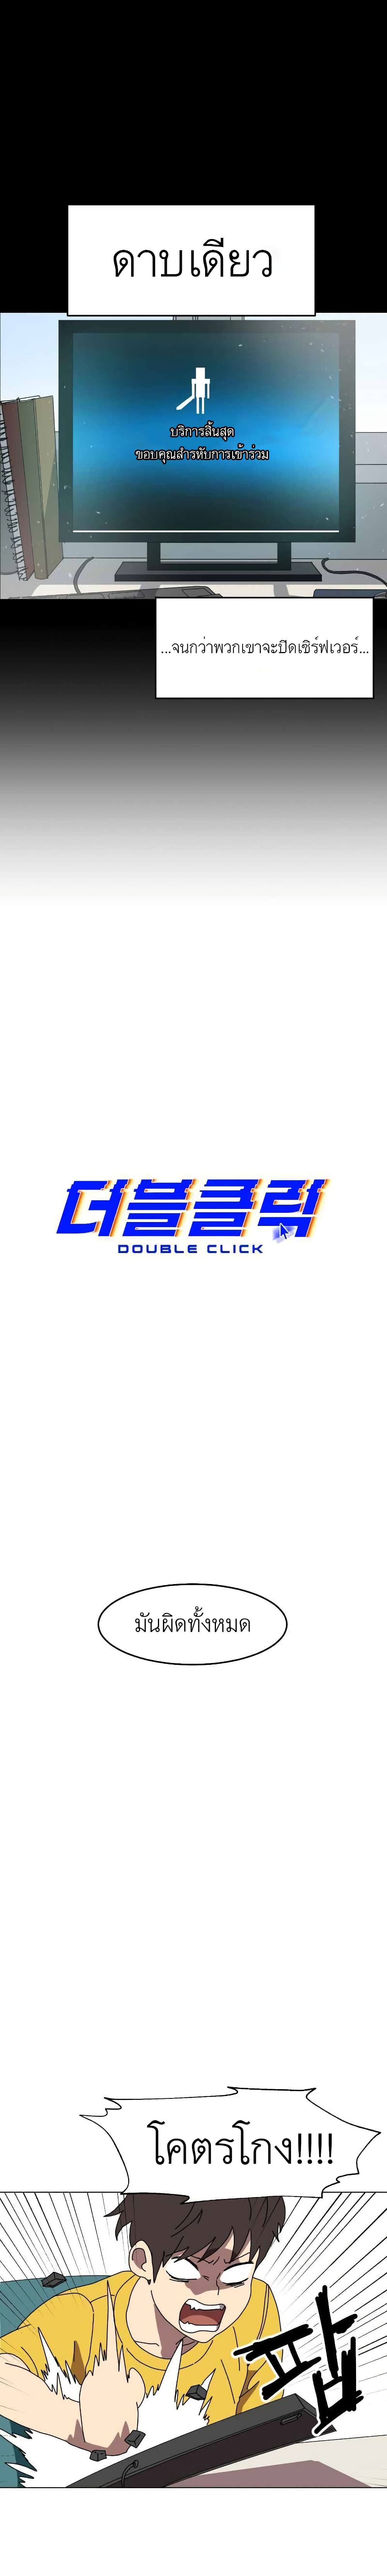 Double Click 2-2